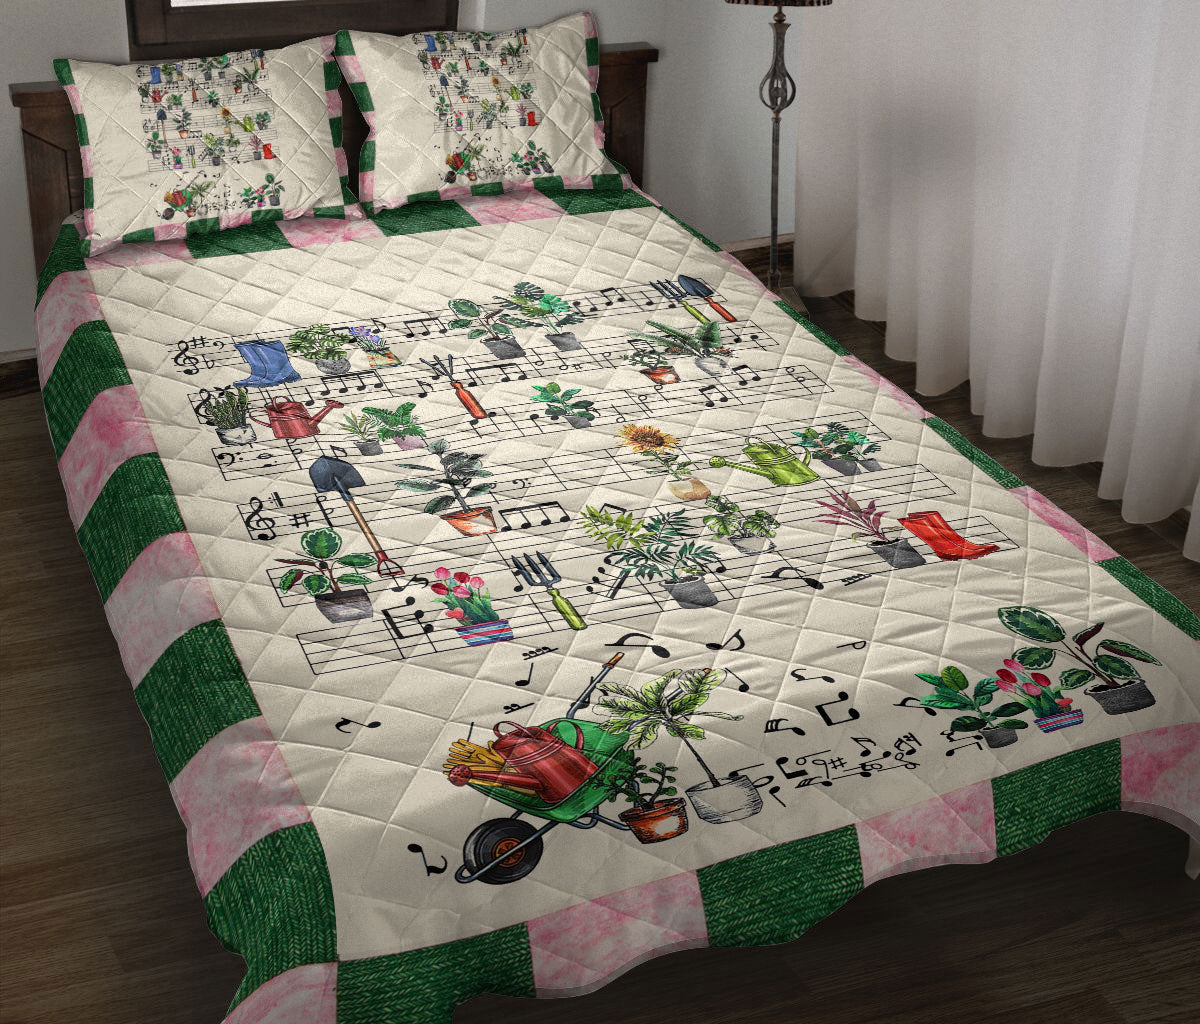 Ohaprints-Quilt-Bed-Set-Pillowcase-Garden-Flower-Tree-Music-Note-Unique-Gift-For-Gardening-Lovers-Green-Beige-Blanket-Bedspread-Bedding-2642-Throw (55'' x 60'')